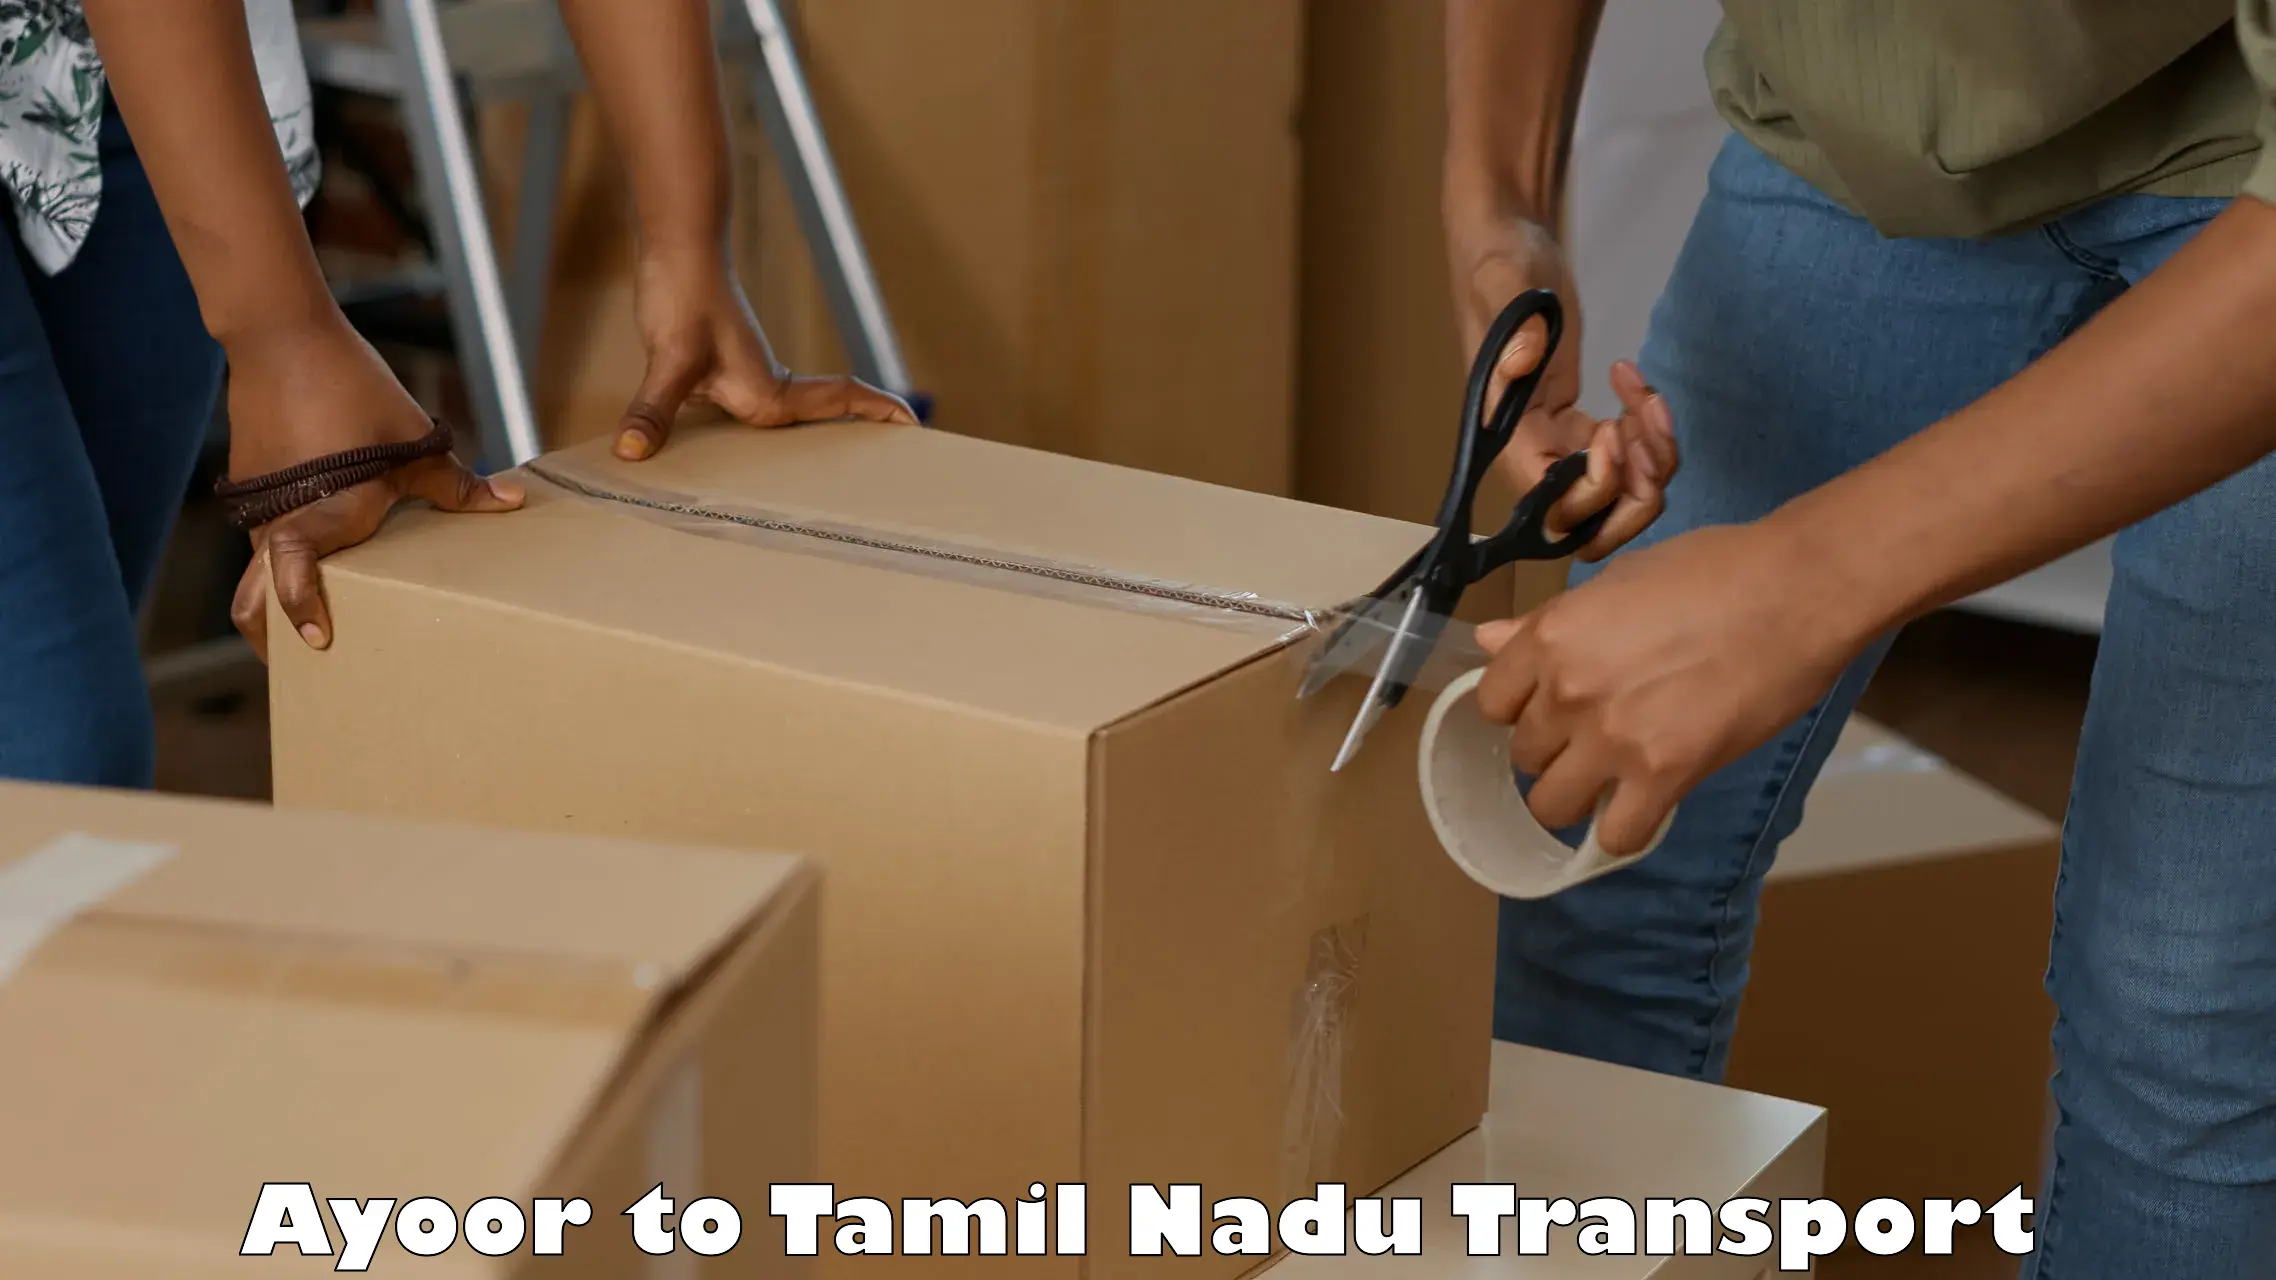 All India transport service Ayoor to Ayyampettai